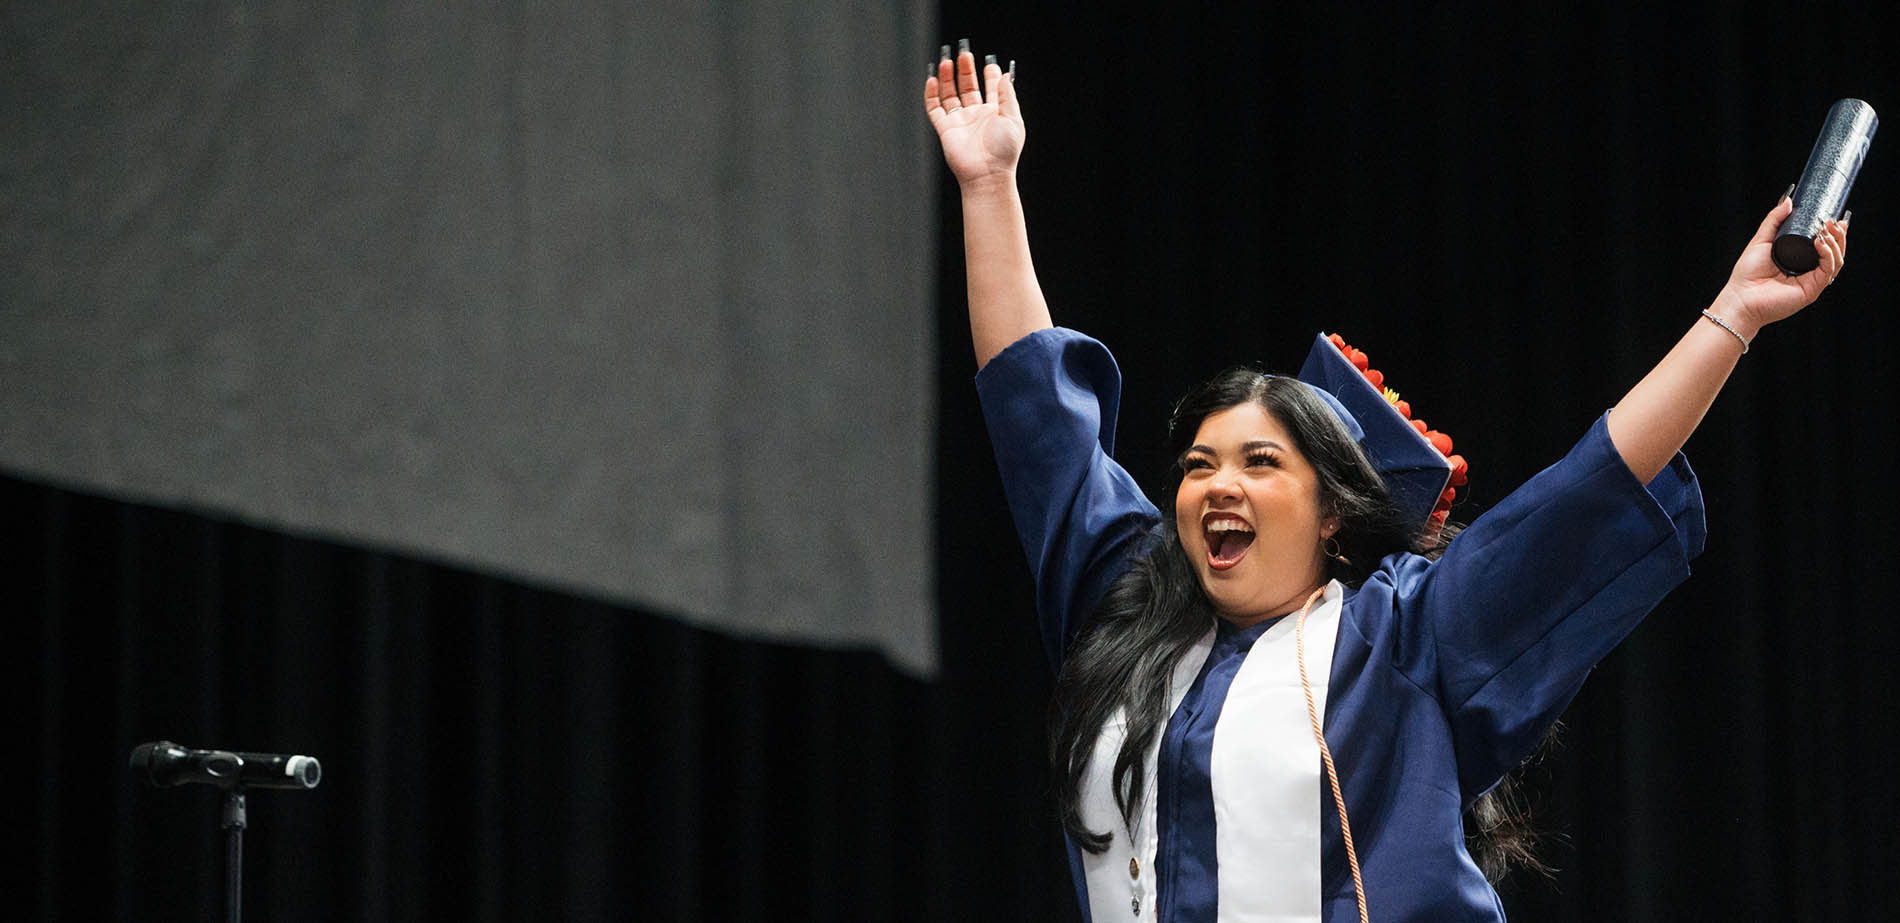 A DMC graduate holding up her arms in triumph